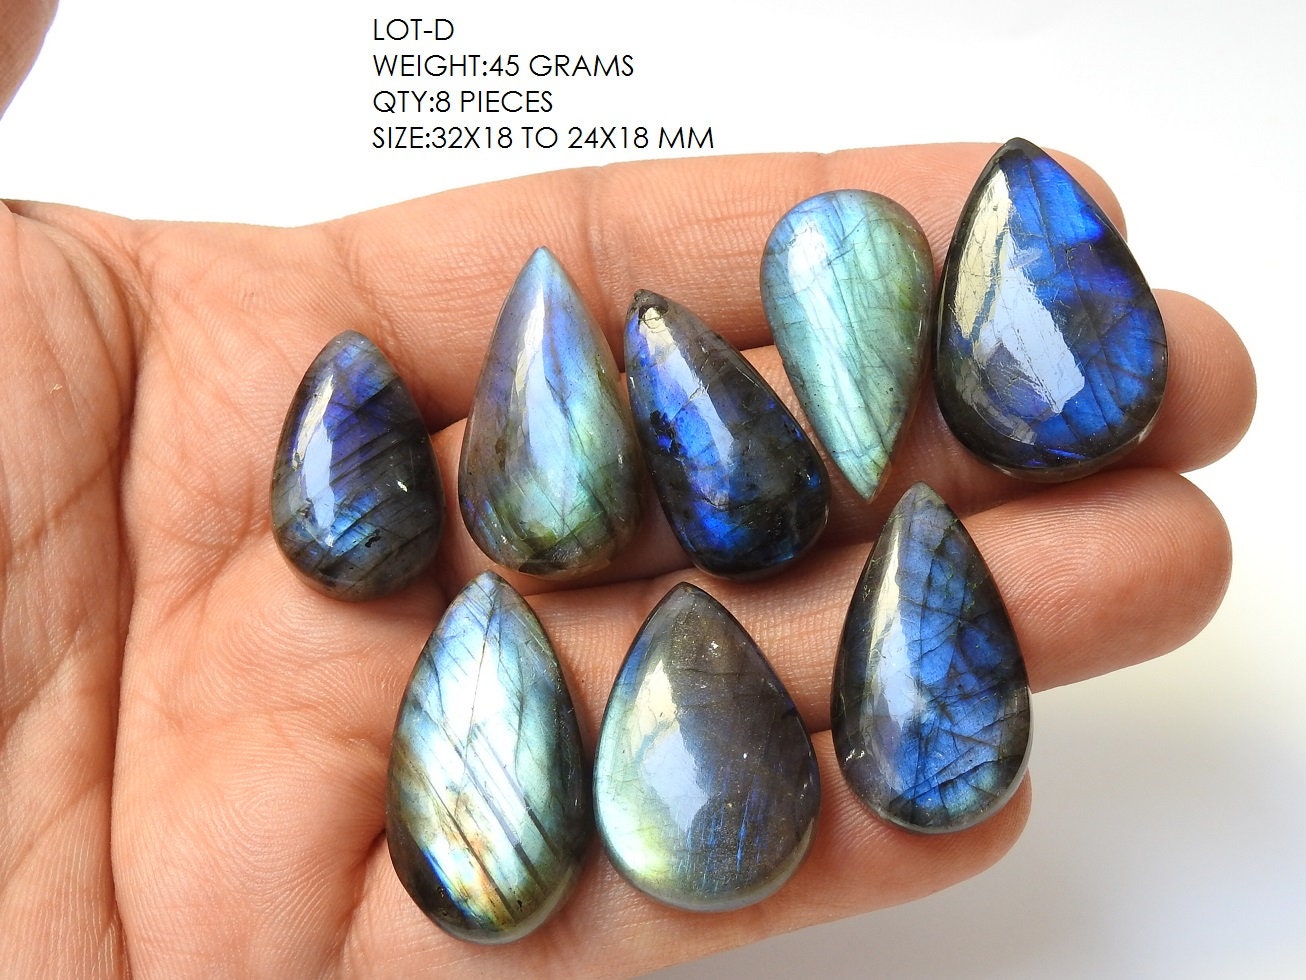 Labradorite Smooth Cabochon Lot,Blue Flashy Fire,Fancy Shapes,Loose Stone,Handmade Gemstone,For Making Pendents,Jewelry 100%Natural PME(C1) | Save 33% - Rajasthan Living 18